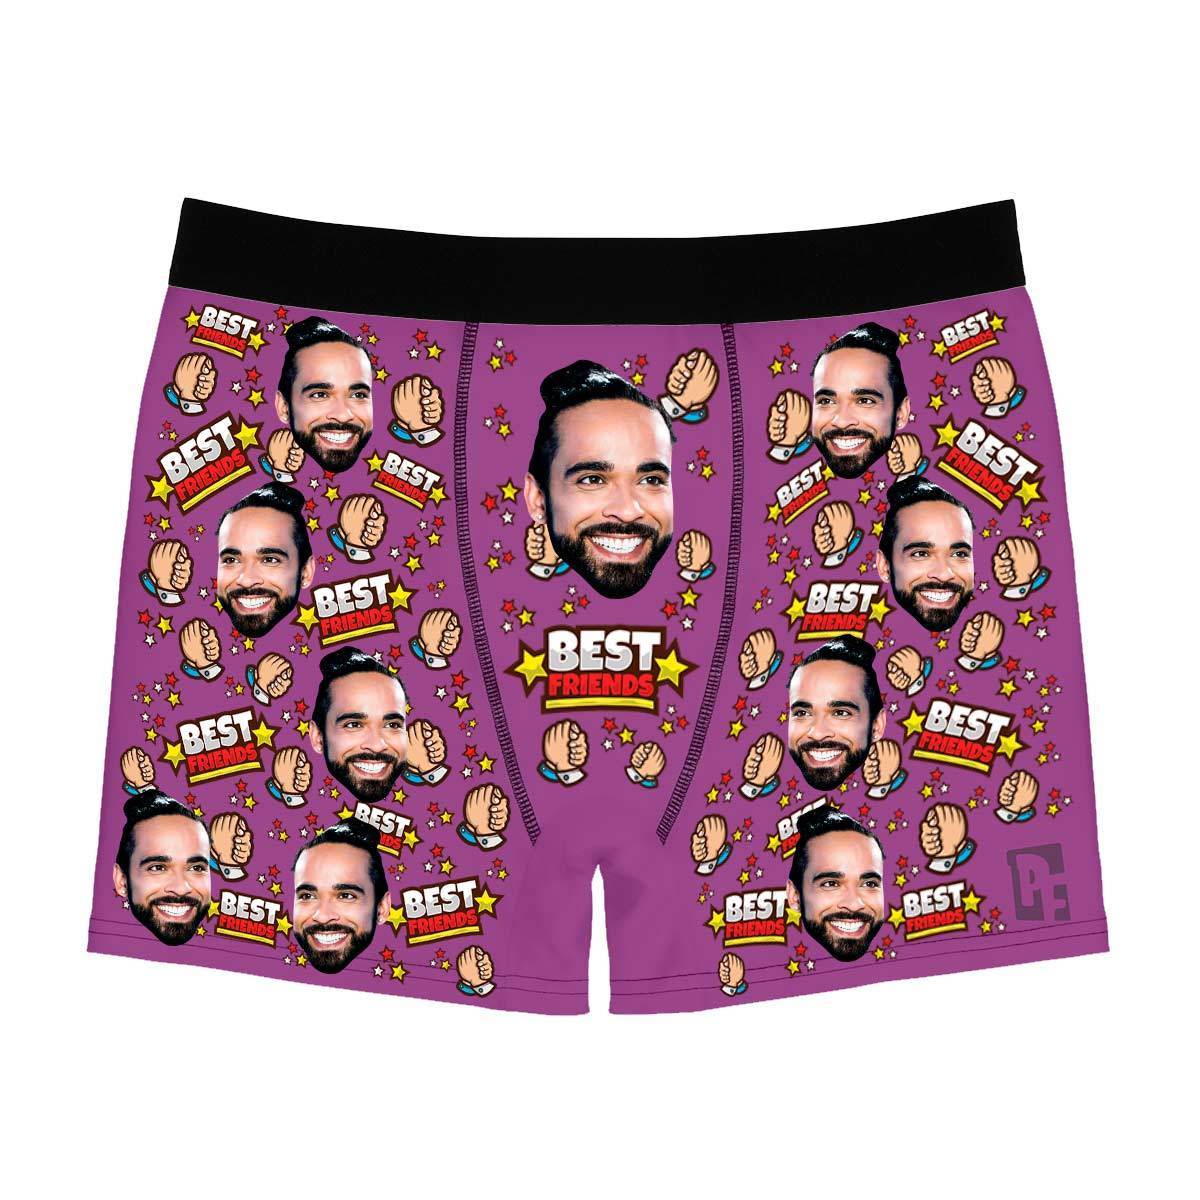 Purple Best Friends men's boxer briefs personalized with photo printed on them